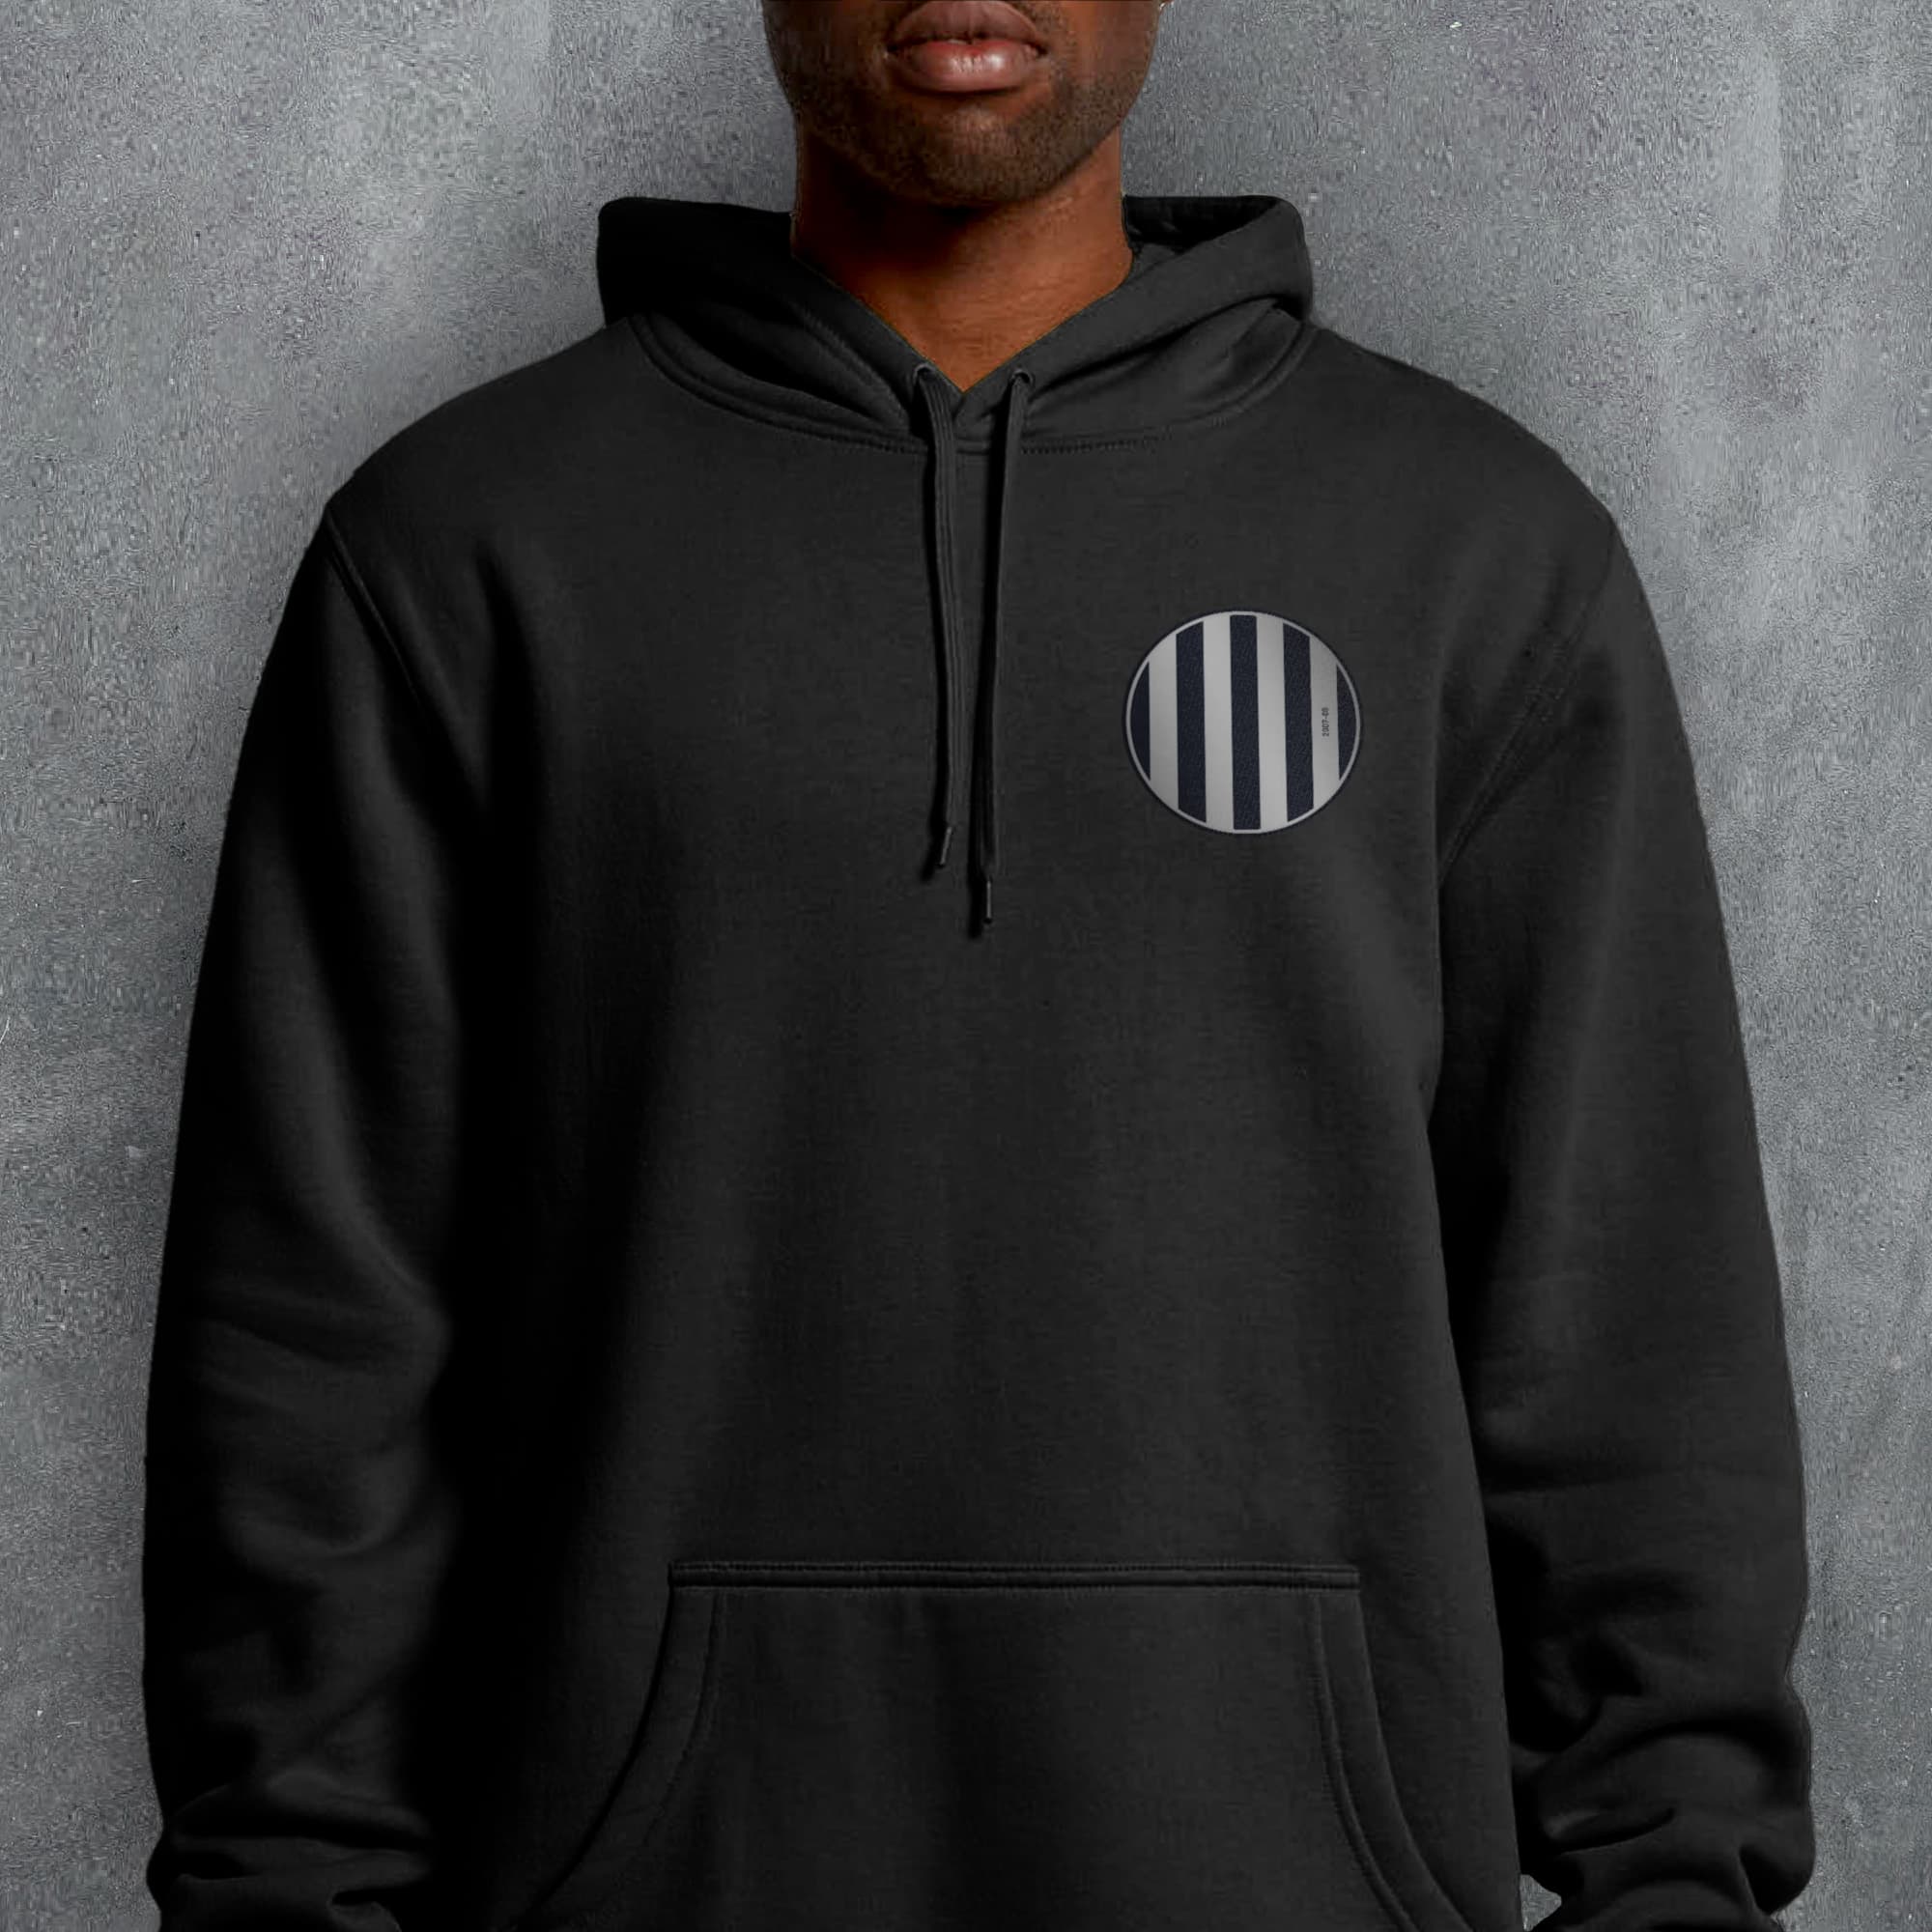 a man wearing a black hoodie with a black and white striped circle on the